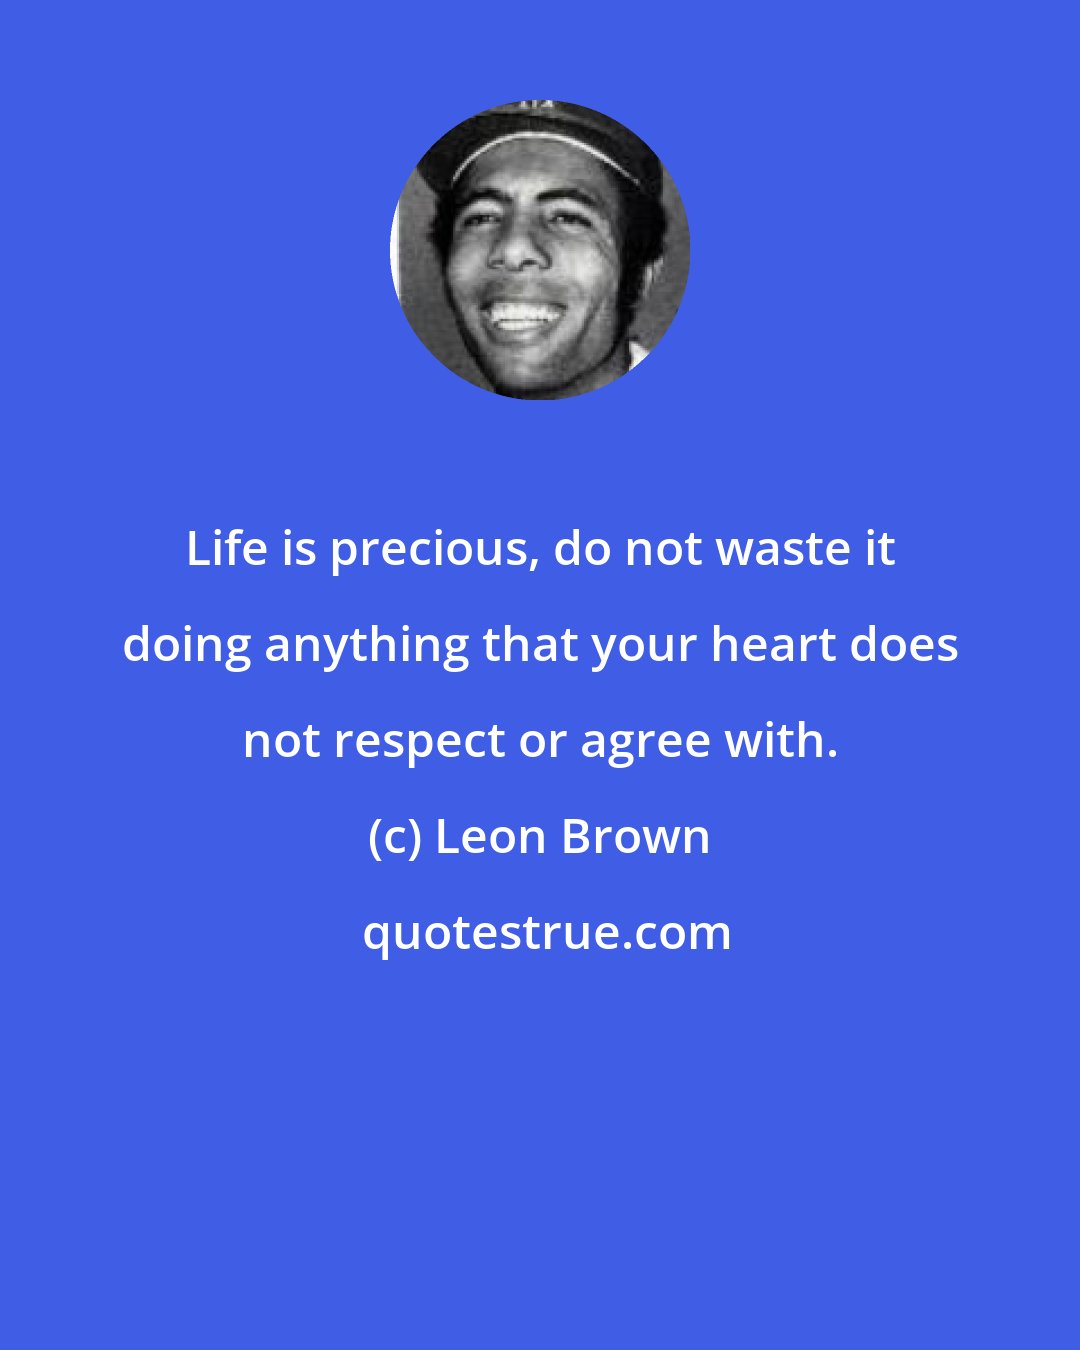 Leon Brown: Life is precious, do not waste it doing anything that your heart does not respect or agree with.